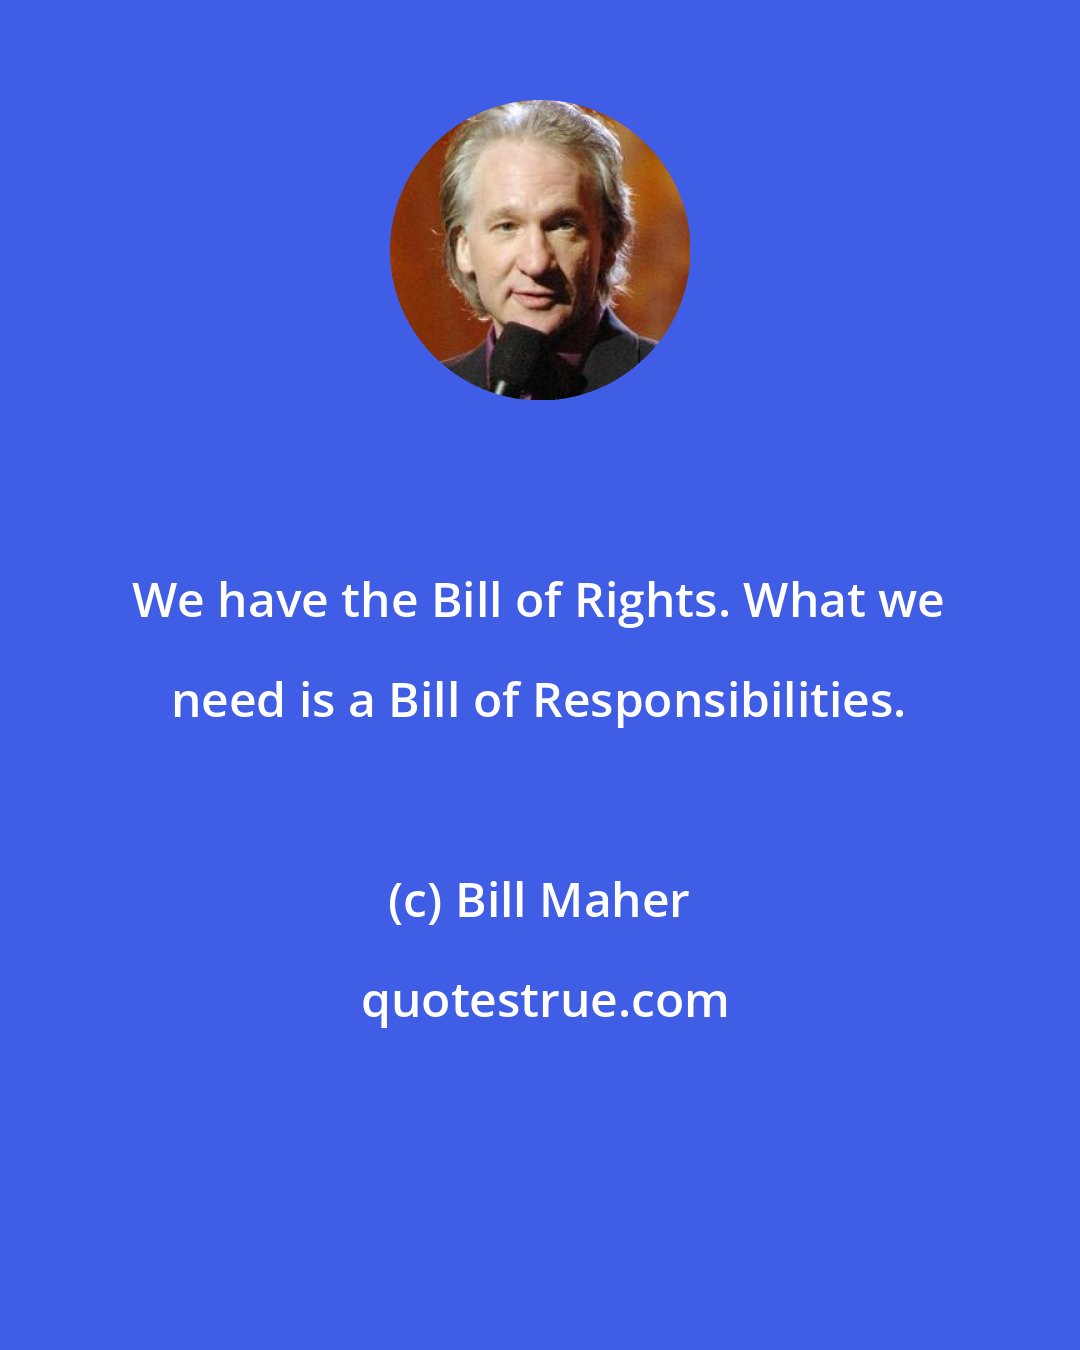 Bill Maher: We have the Bill of Rights. What we need is a Bill of Responsibilities.